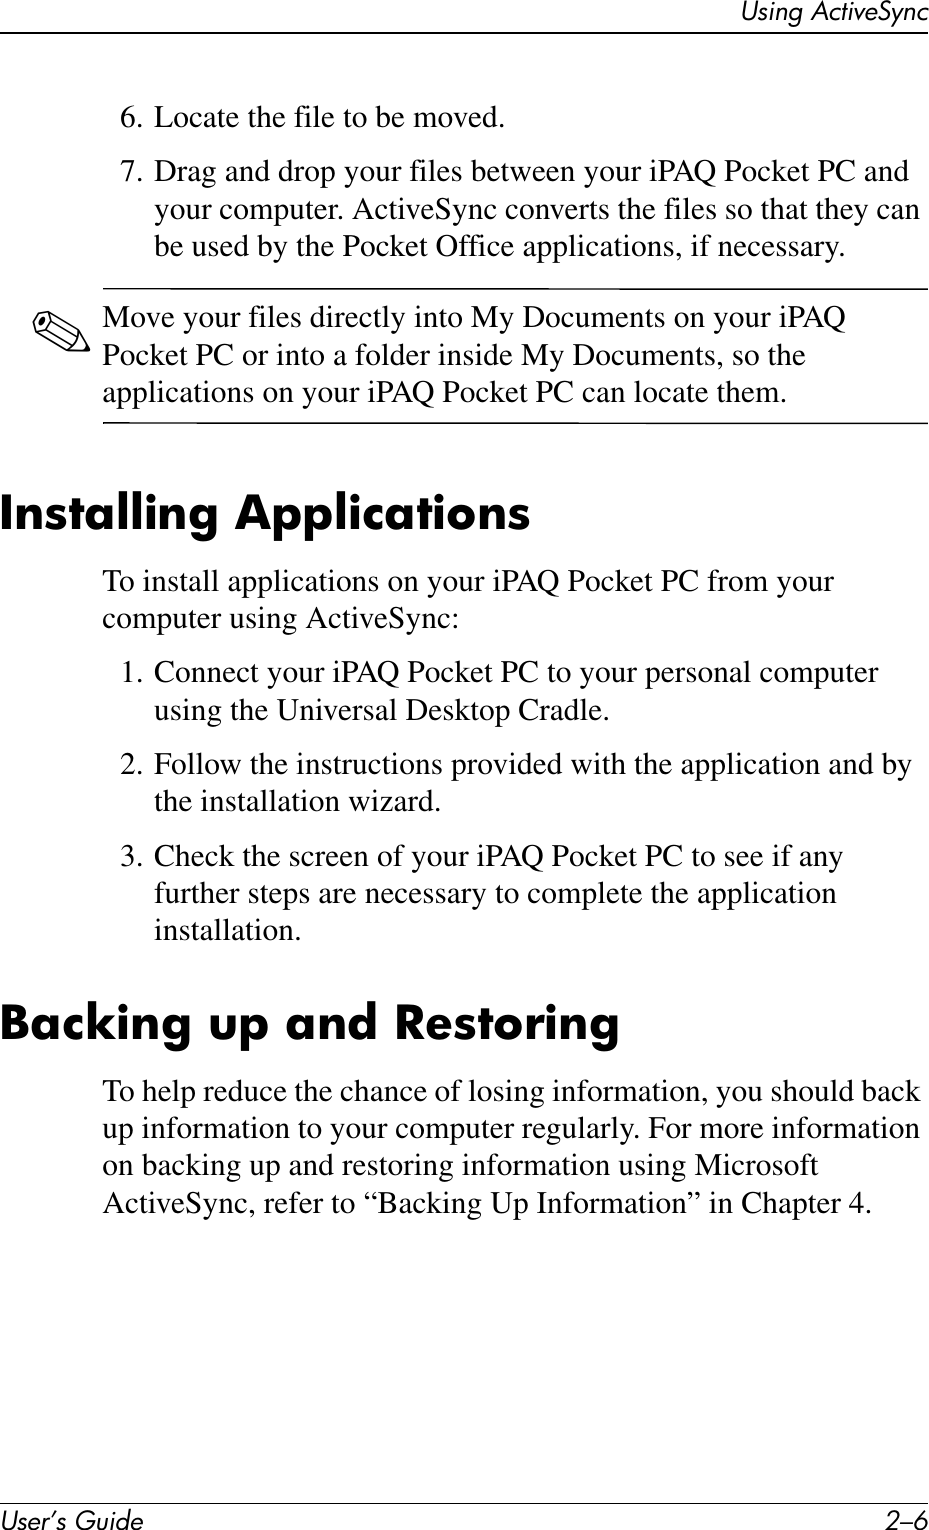 User’s Guide 2–6Using ActiveSync6. Locate the file to be moved.7. Drag and drop your files between your iPAQ Pocket PC and your computer. ActiveSync converts the files so that they can be used by the Pocket Office applications, if necessary.✎Move your files directly into My Documents on your iPAQ Pocket PC or into a folder inside My Documents, so the applications on your iPAQ Pocket PC can locate them.Installing ApplicationsTo install applications on your iPAQ Pocket PC from your computer using ActiveSync:1. Connect your iPAQ Pocket PC to your personal computer using the Universal Desktop Cradle.2. Follow the instructions provided with the application and by the installation wizard.3. Check the screen of your iPAQ Pocket PC to see if any further steps are necessary to complete the application installation.Backing up and RestoringTo help reduce the chance of losing information, you should back up information to your computer regularly. For more information on backing up and restoring information using Microsoft ActiveSync, refer to “Backing Up Information” in Chapter 4.